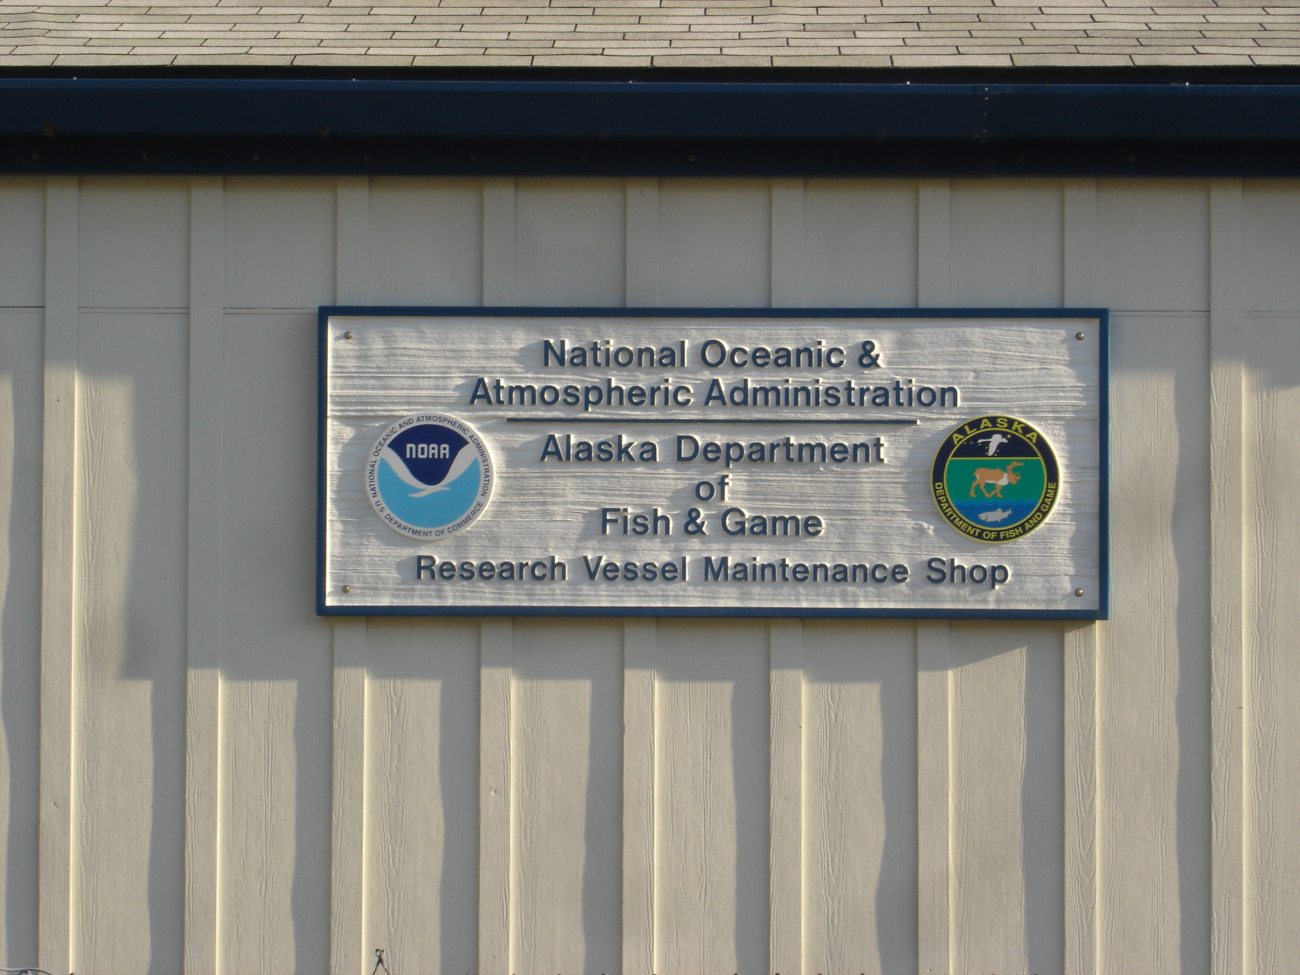 NOAA and Alaska Department of Fish and Game Research Vessel MaintenanceShop